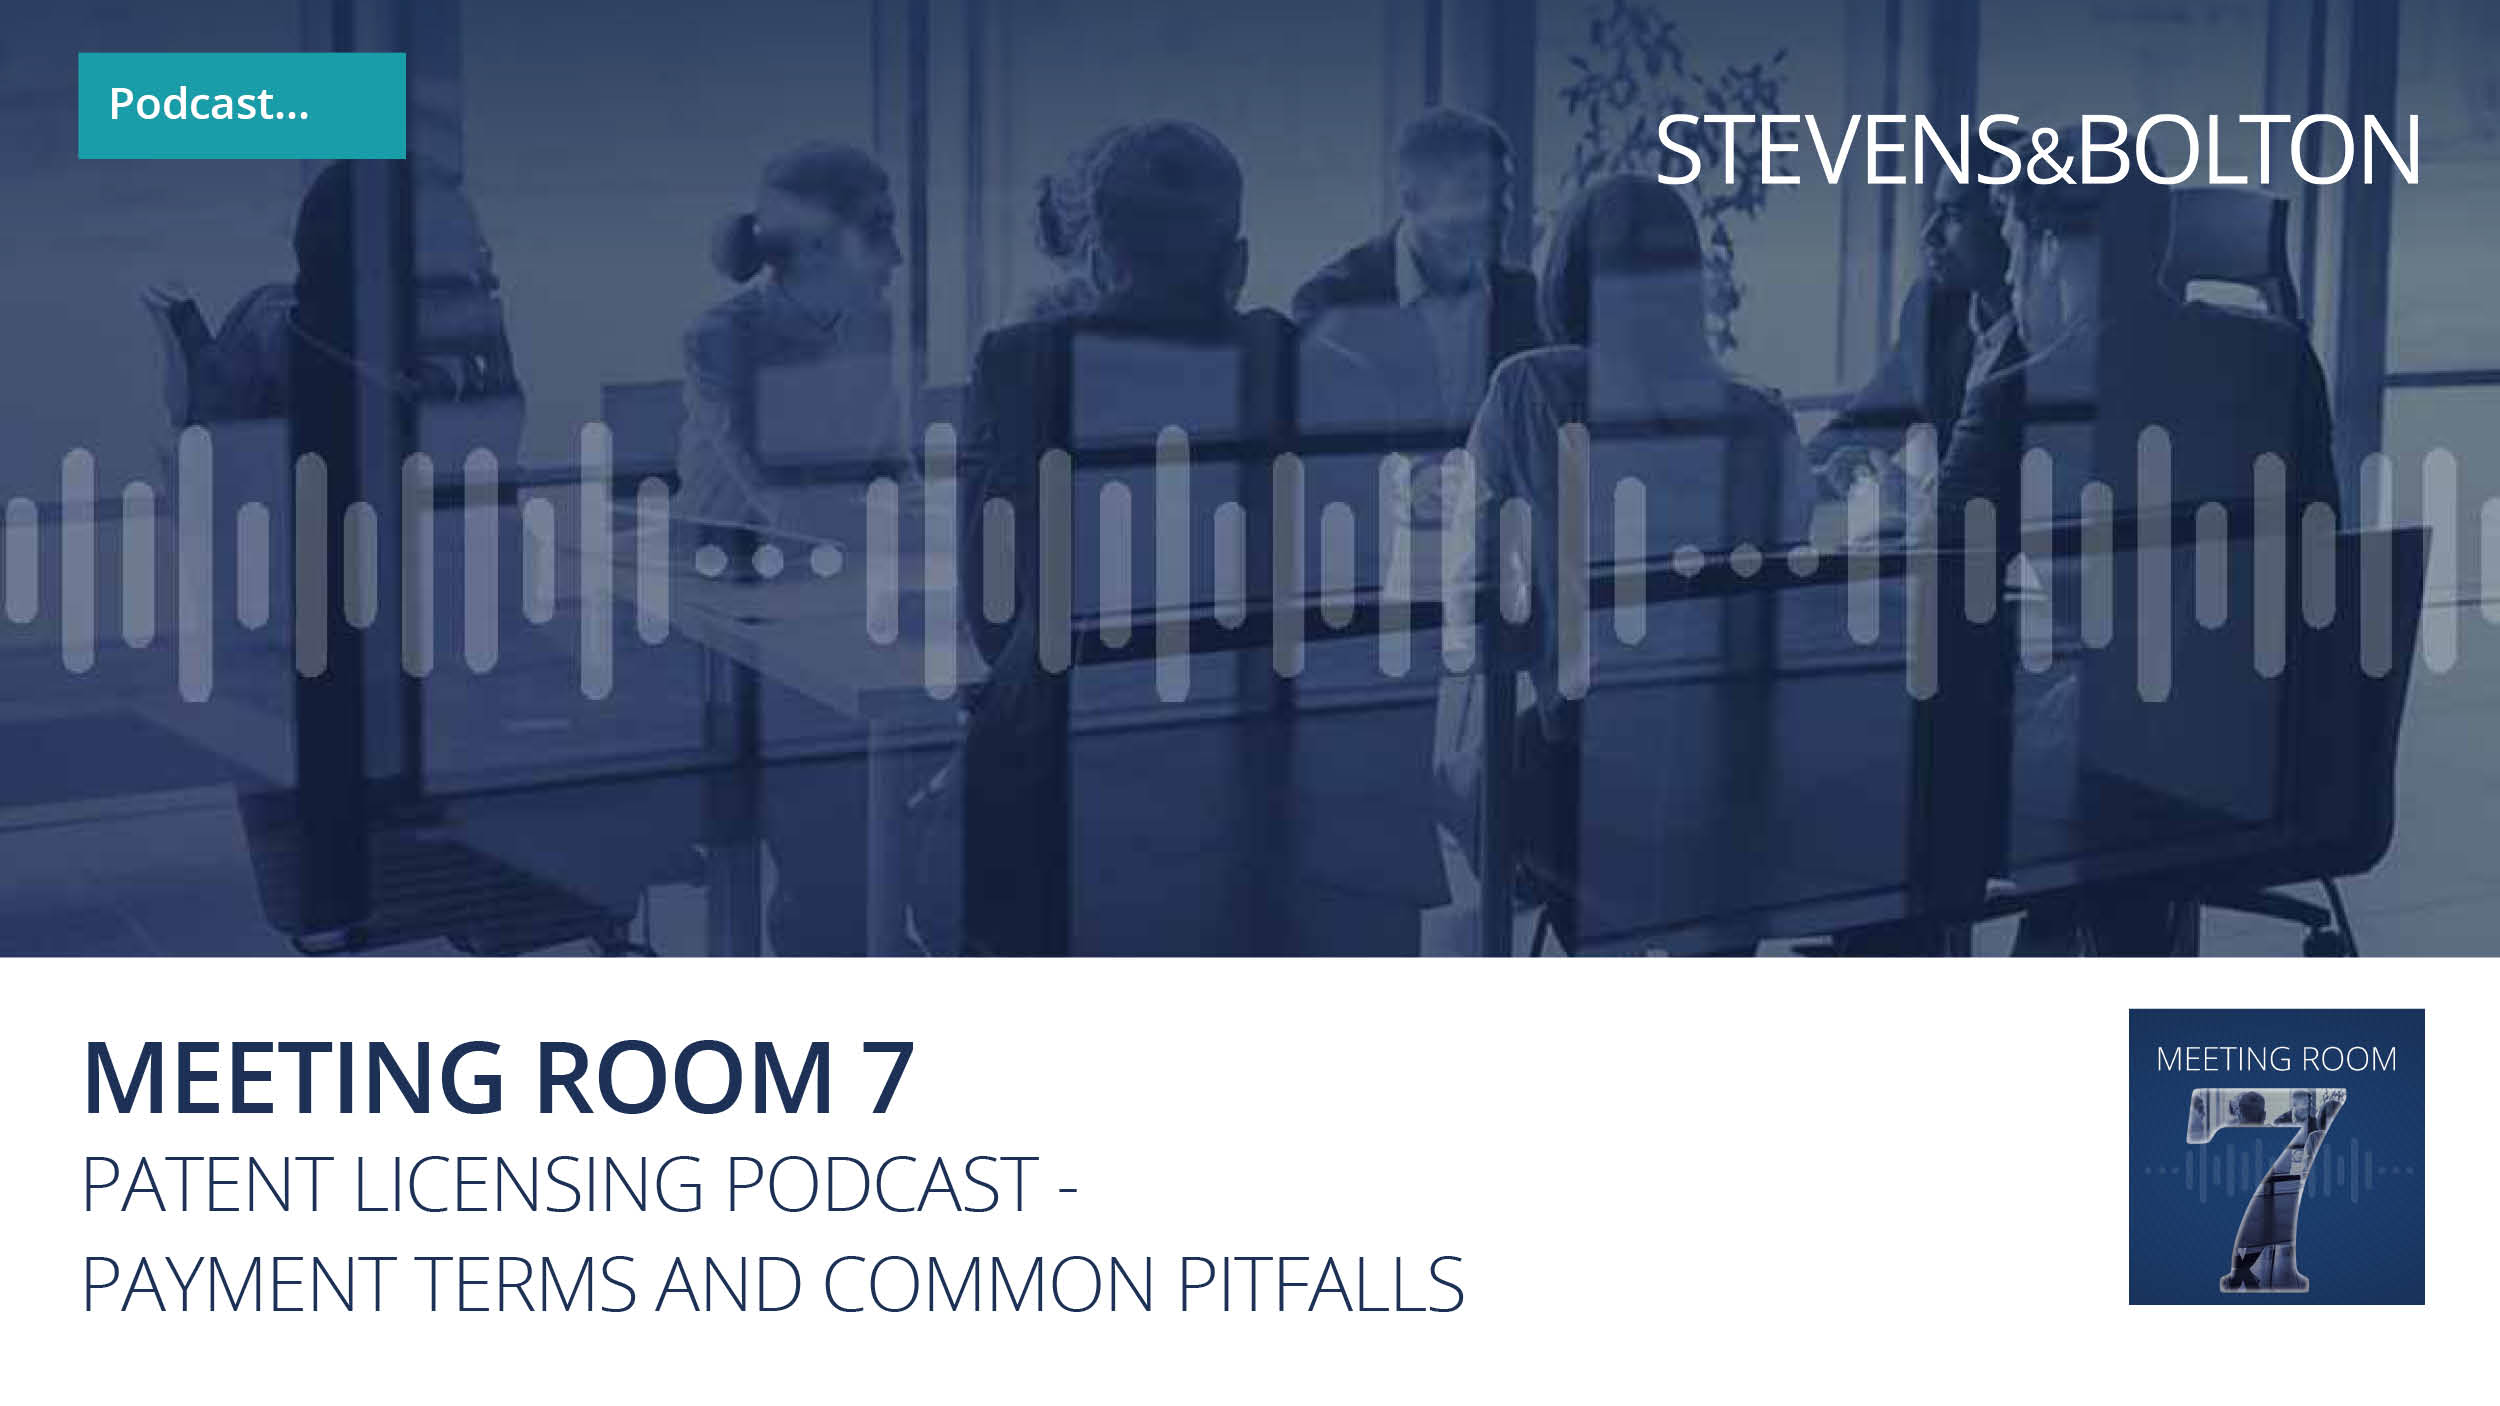 Meeting Room 7 - The patent licensing podcast - Payment terms and common pitfalls